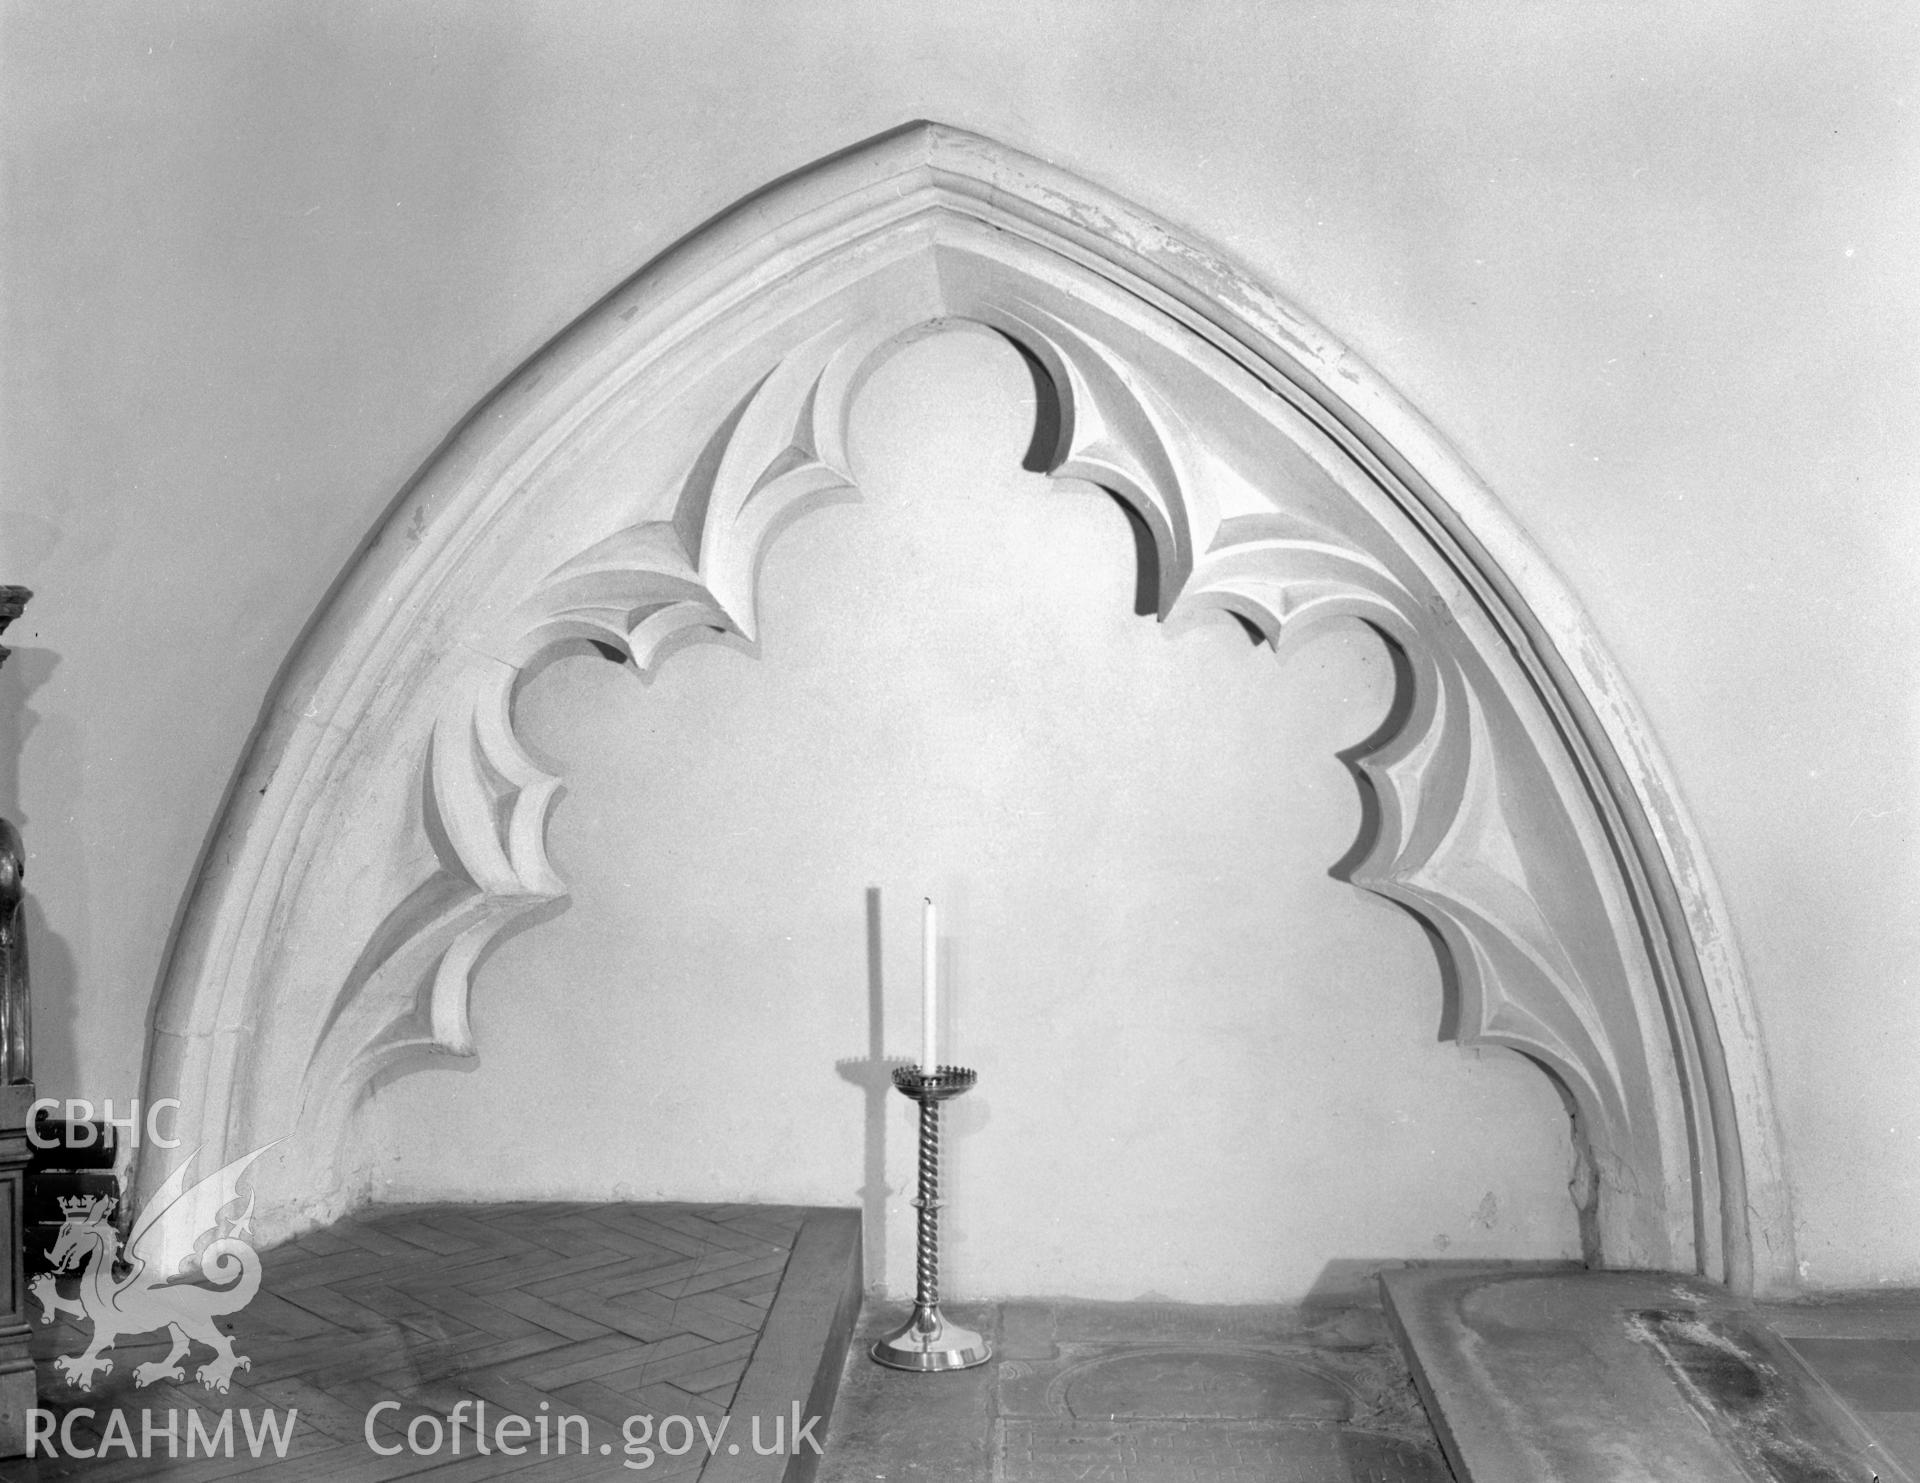 Interior view of St George's Church showing memorial arch in wall,  taken 25.06.65.